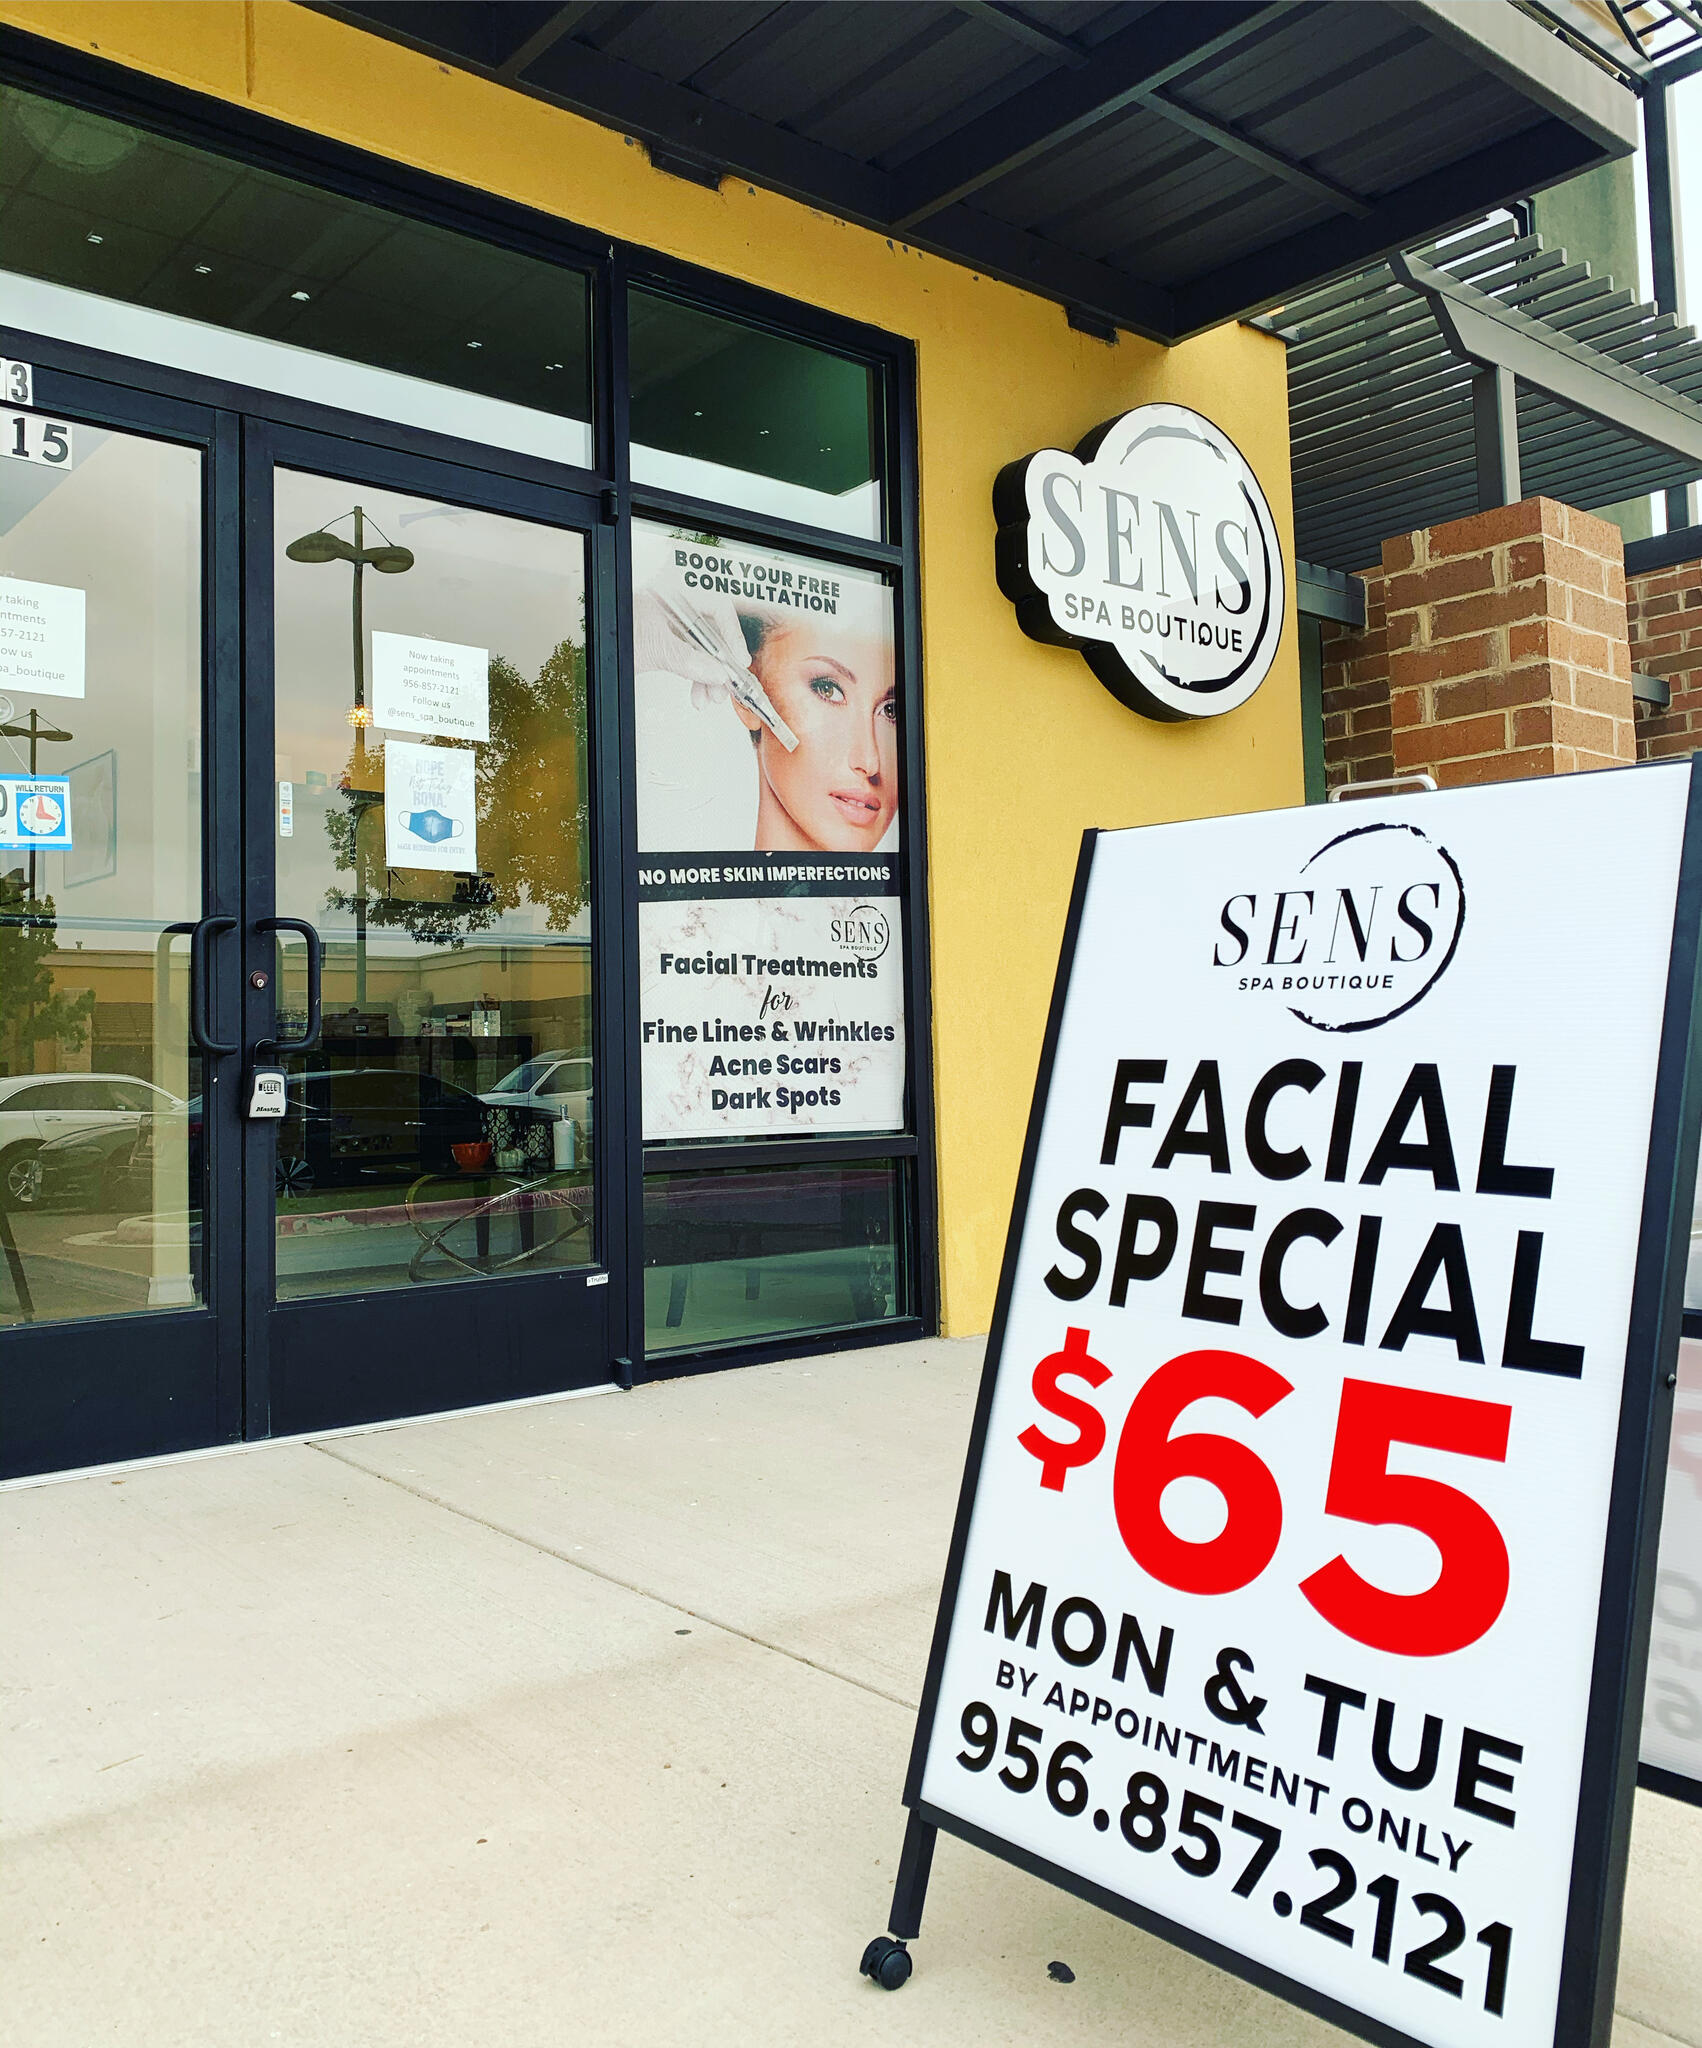 Facial Treatments For Fine Lines & Wrinkles